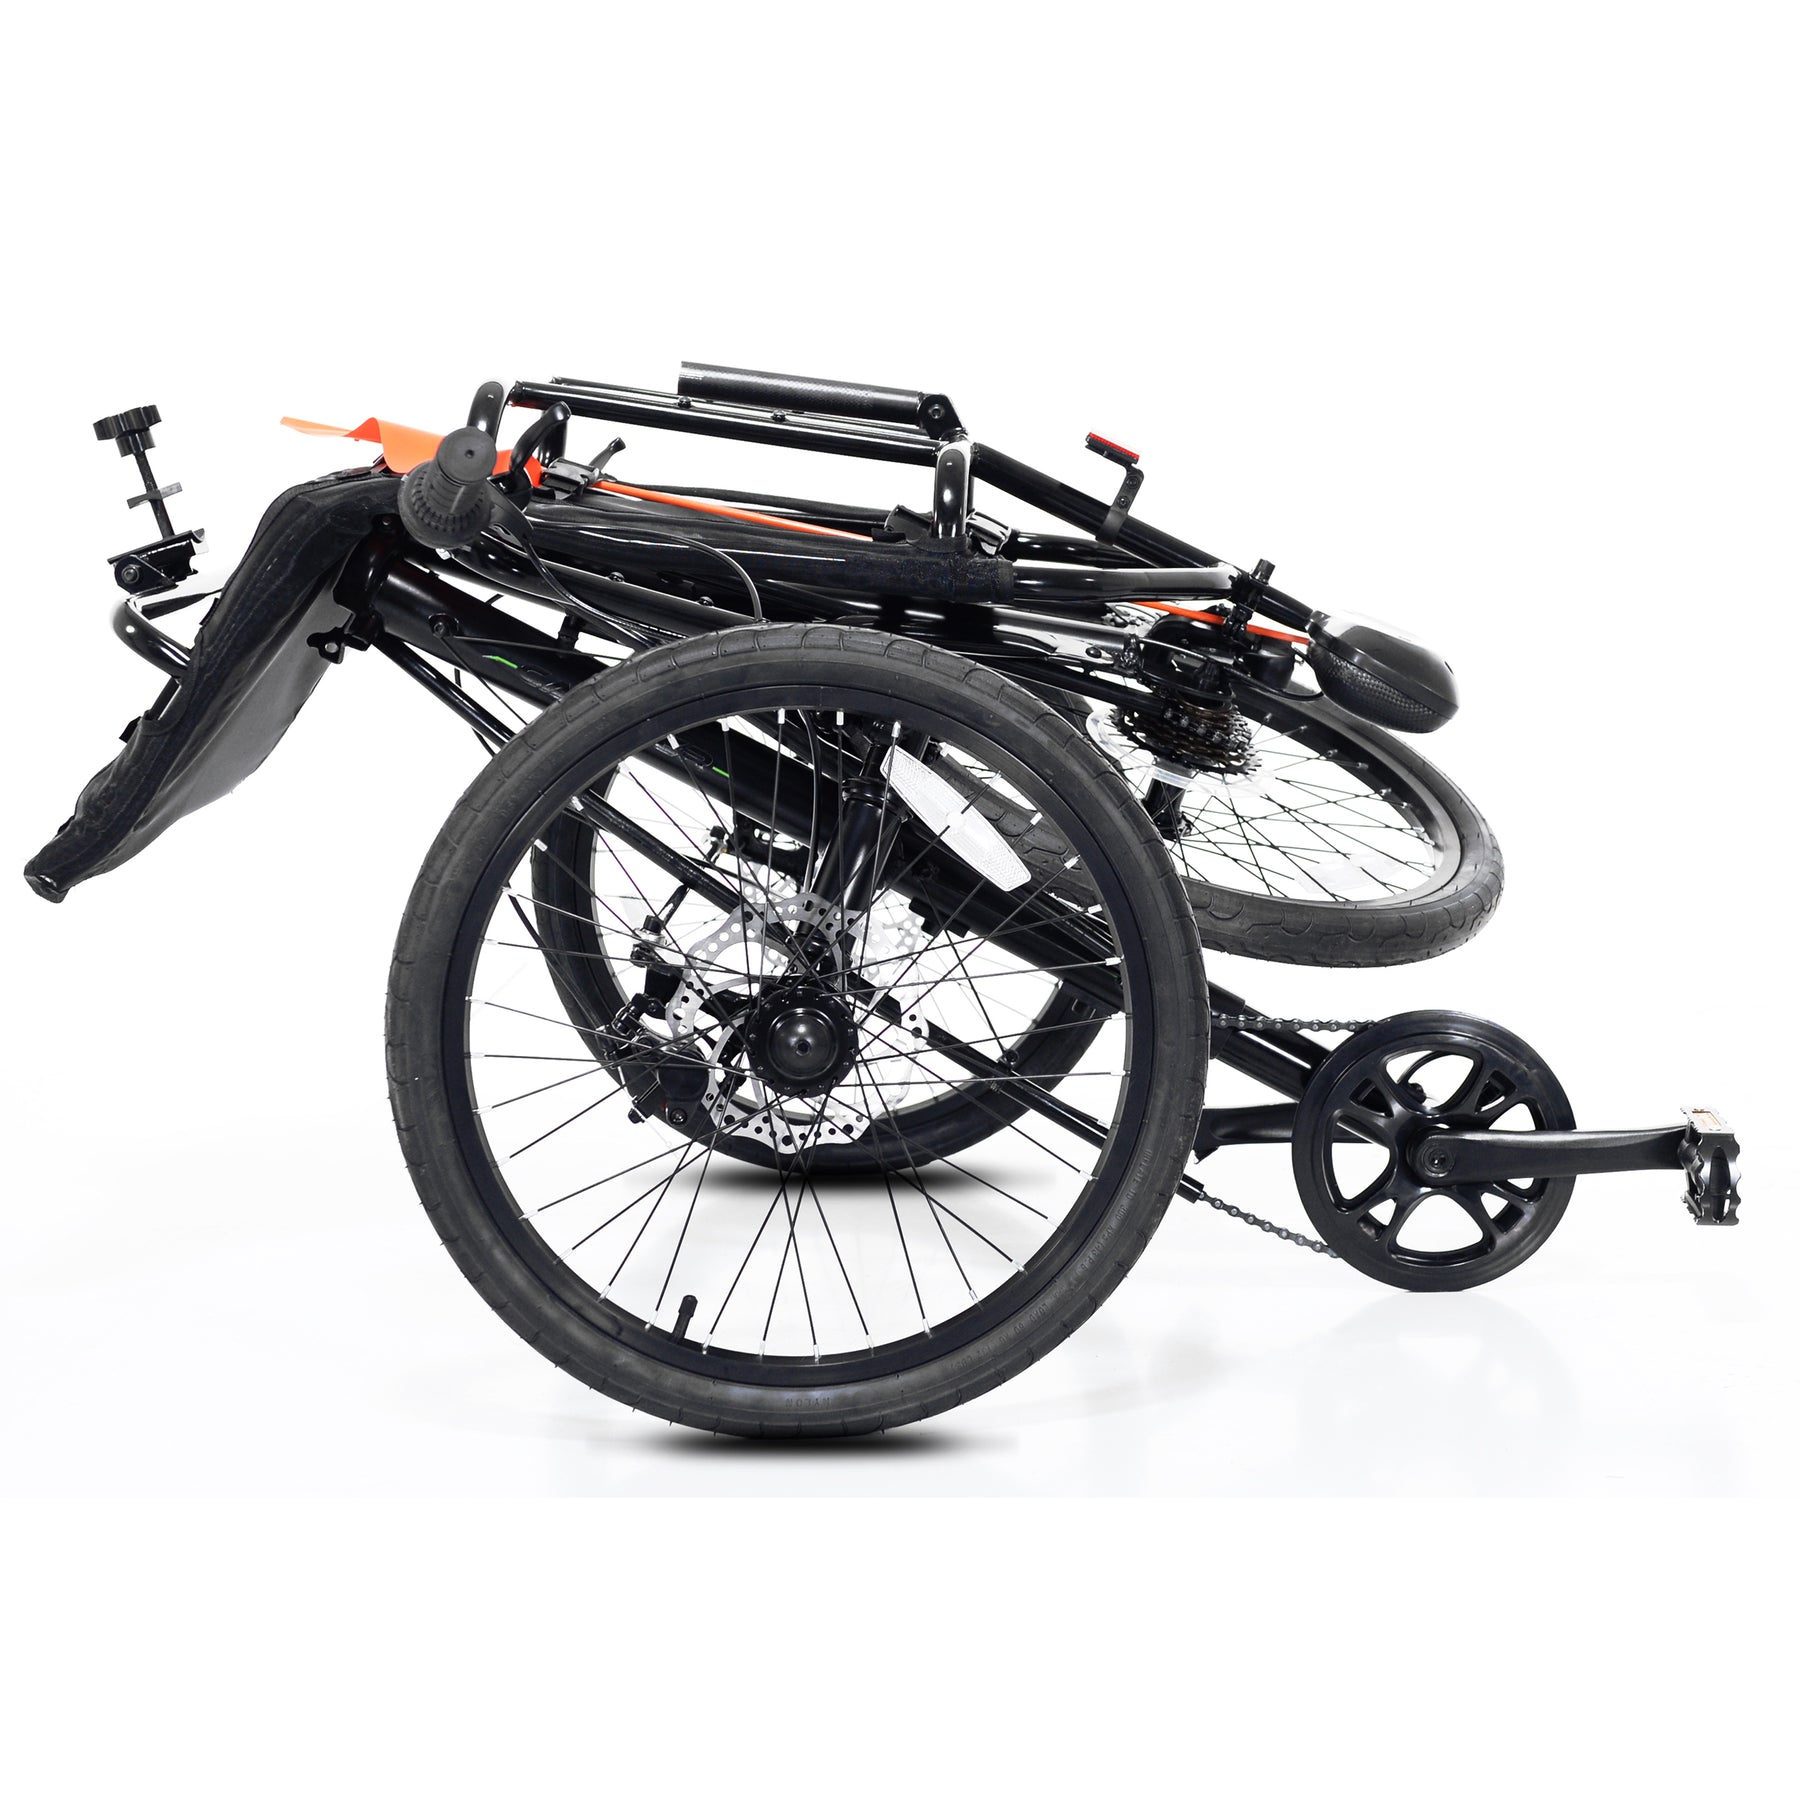 20" Kent Cavalier | Recumbent Tricycle for Adults Ages 14+